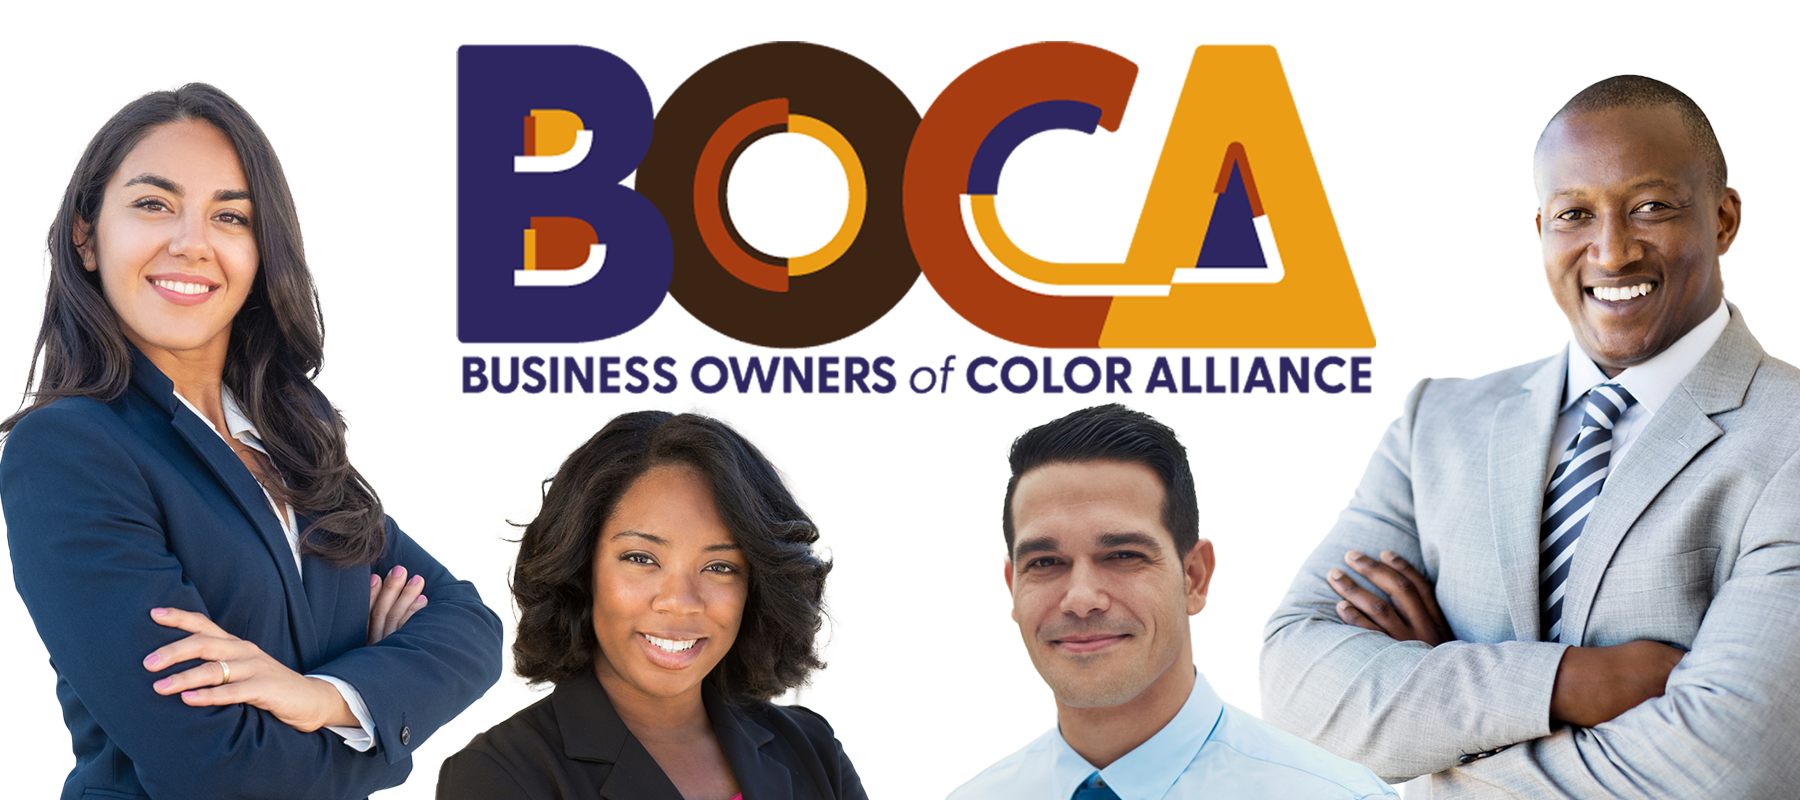 The logo Business Owners of Color Alliance (BOCA) surrounded by images of business owners of color